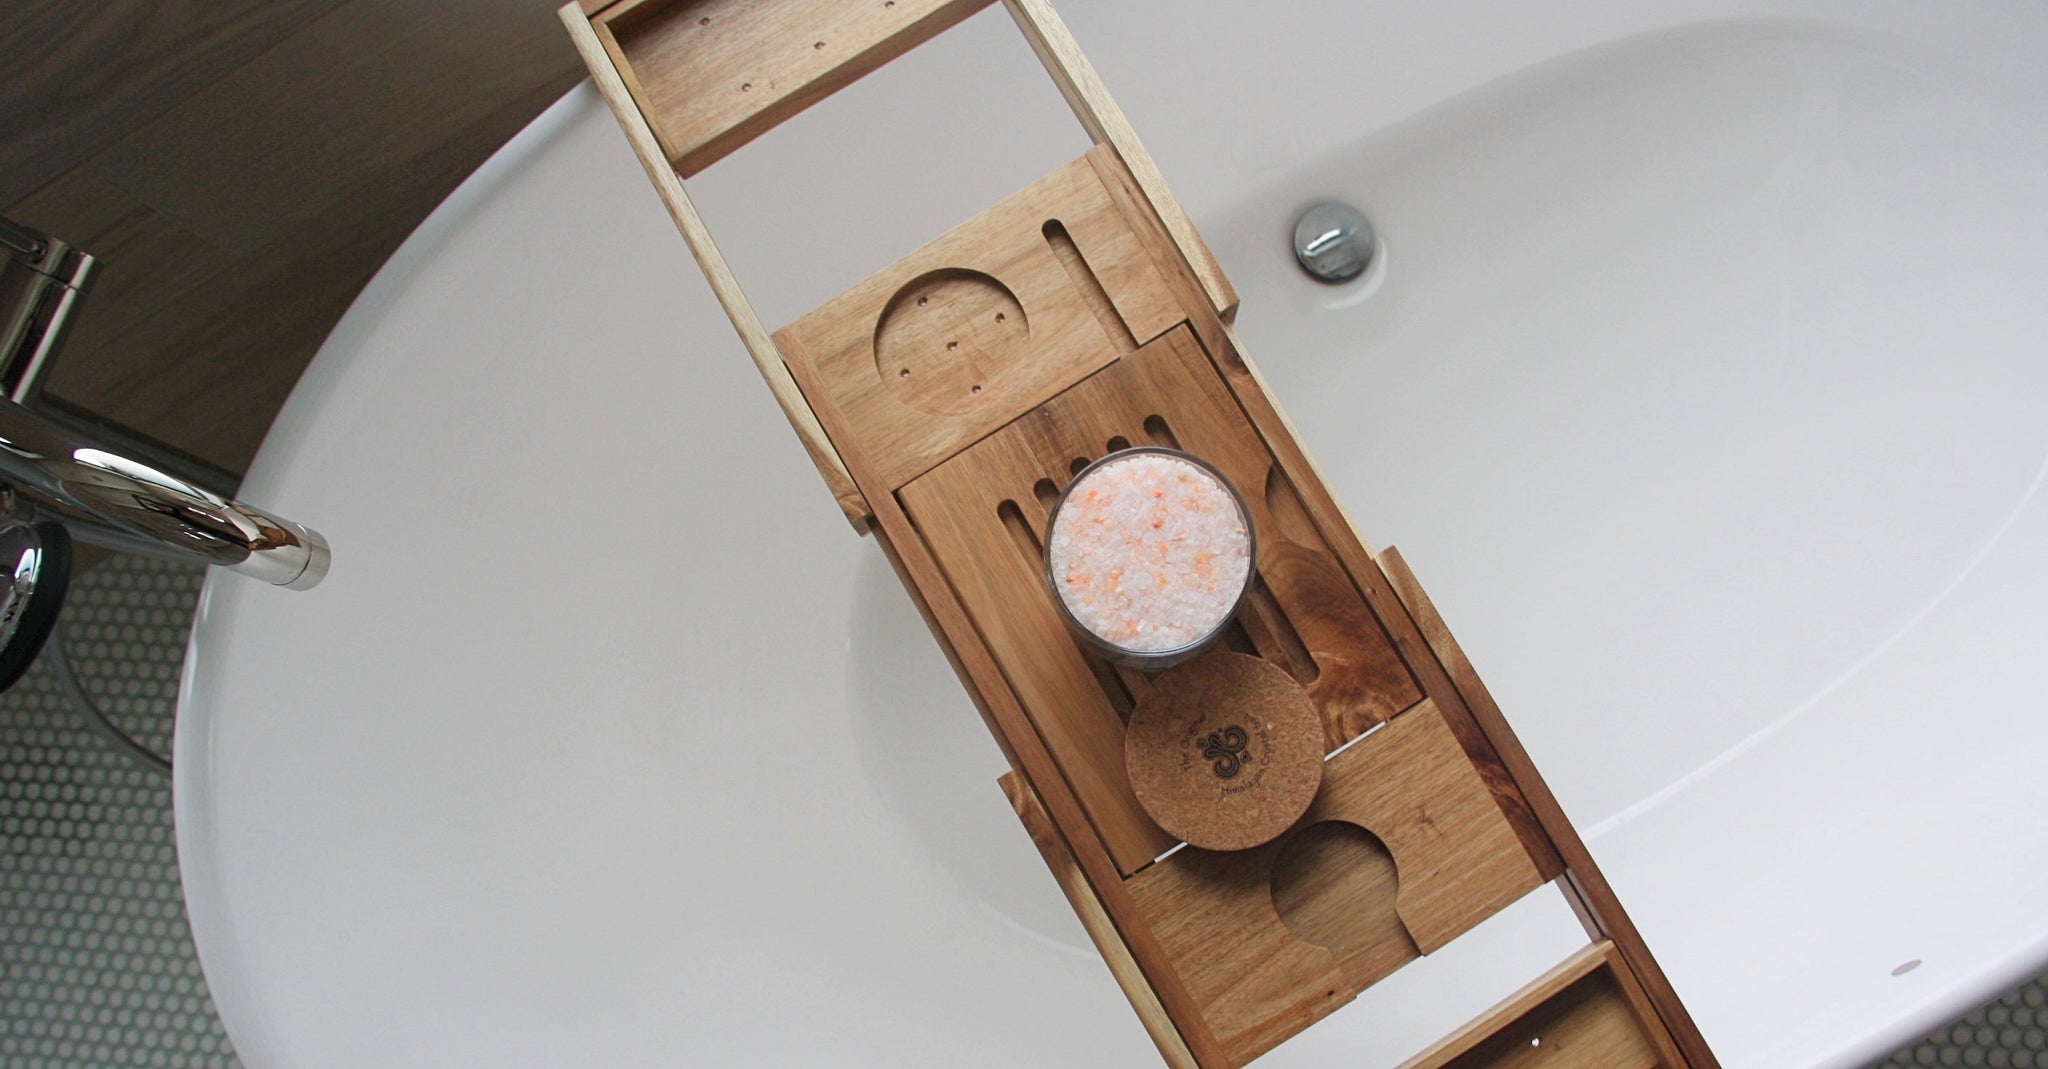 Rejuvenate Bath Salts product glass jar filled with Himalayan Crystal Salt, cork cover  resting on wooden tray with slats and candle holder groove resting on white tub in bathroom with window